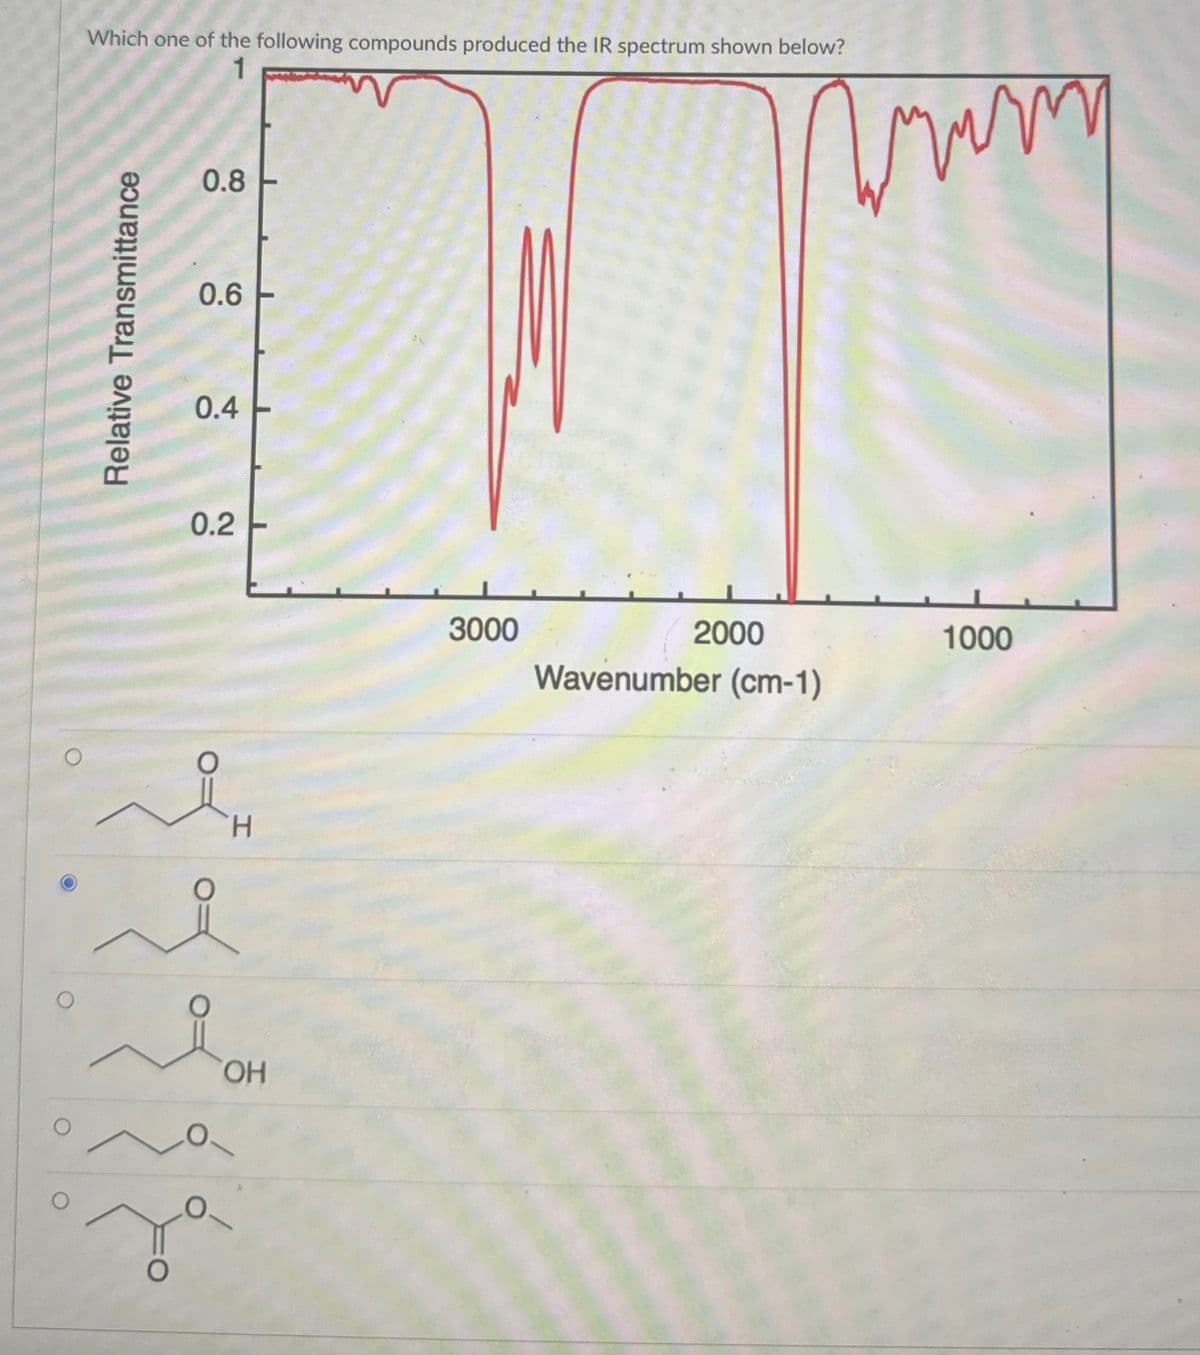 Which one of the following compounds produced the IR spectrum shown below?
1
Relative Transmittance
O
0.8-
80
0.6
0.4
0.2
H
OH
3000
2000
Wavenumber (cm-1)
W
1000